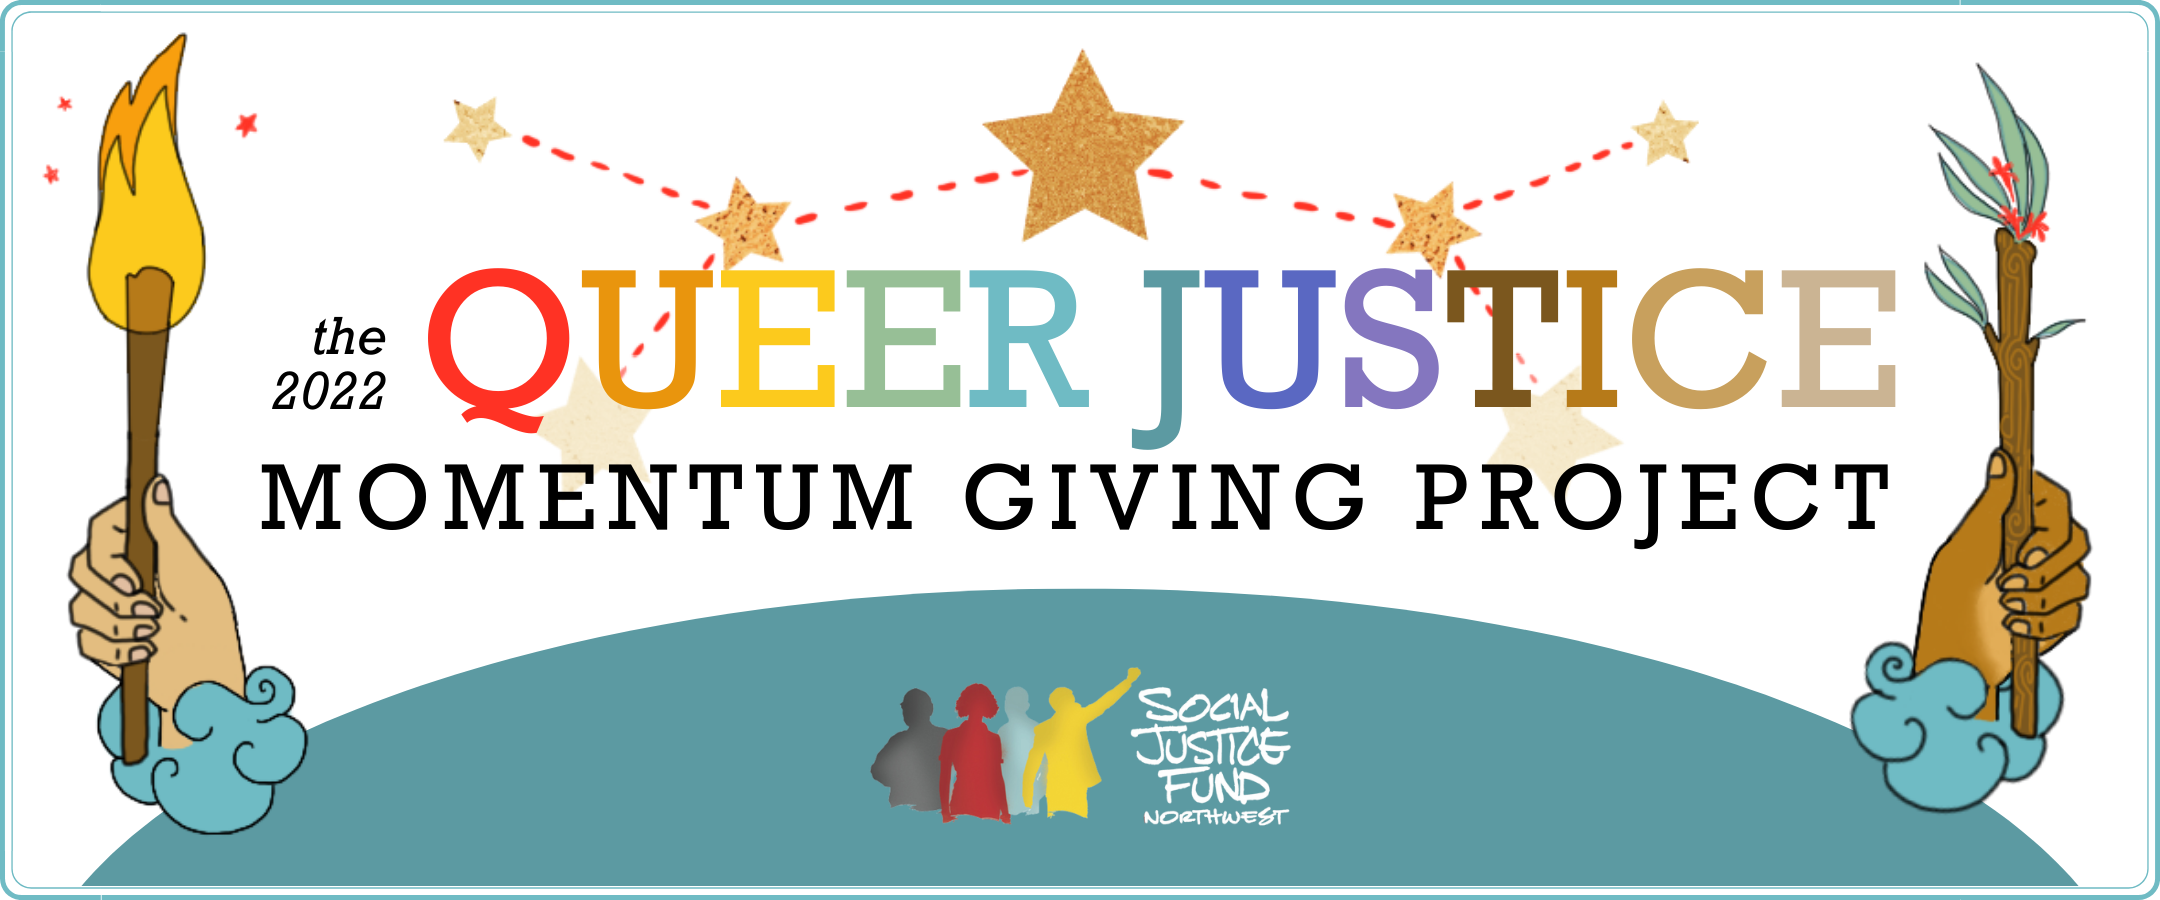 Rectangular banner with colorful illustrations evoking a tarot card. Text reads the 2022 Queer Justice Momentum Giving Project.